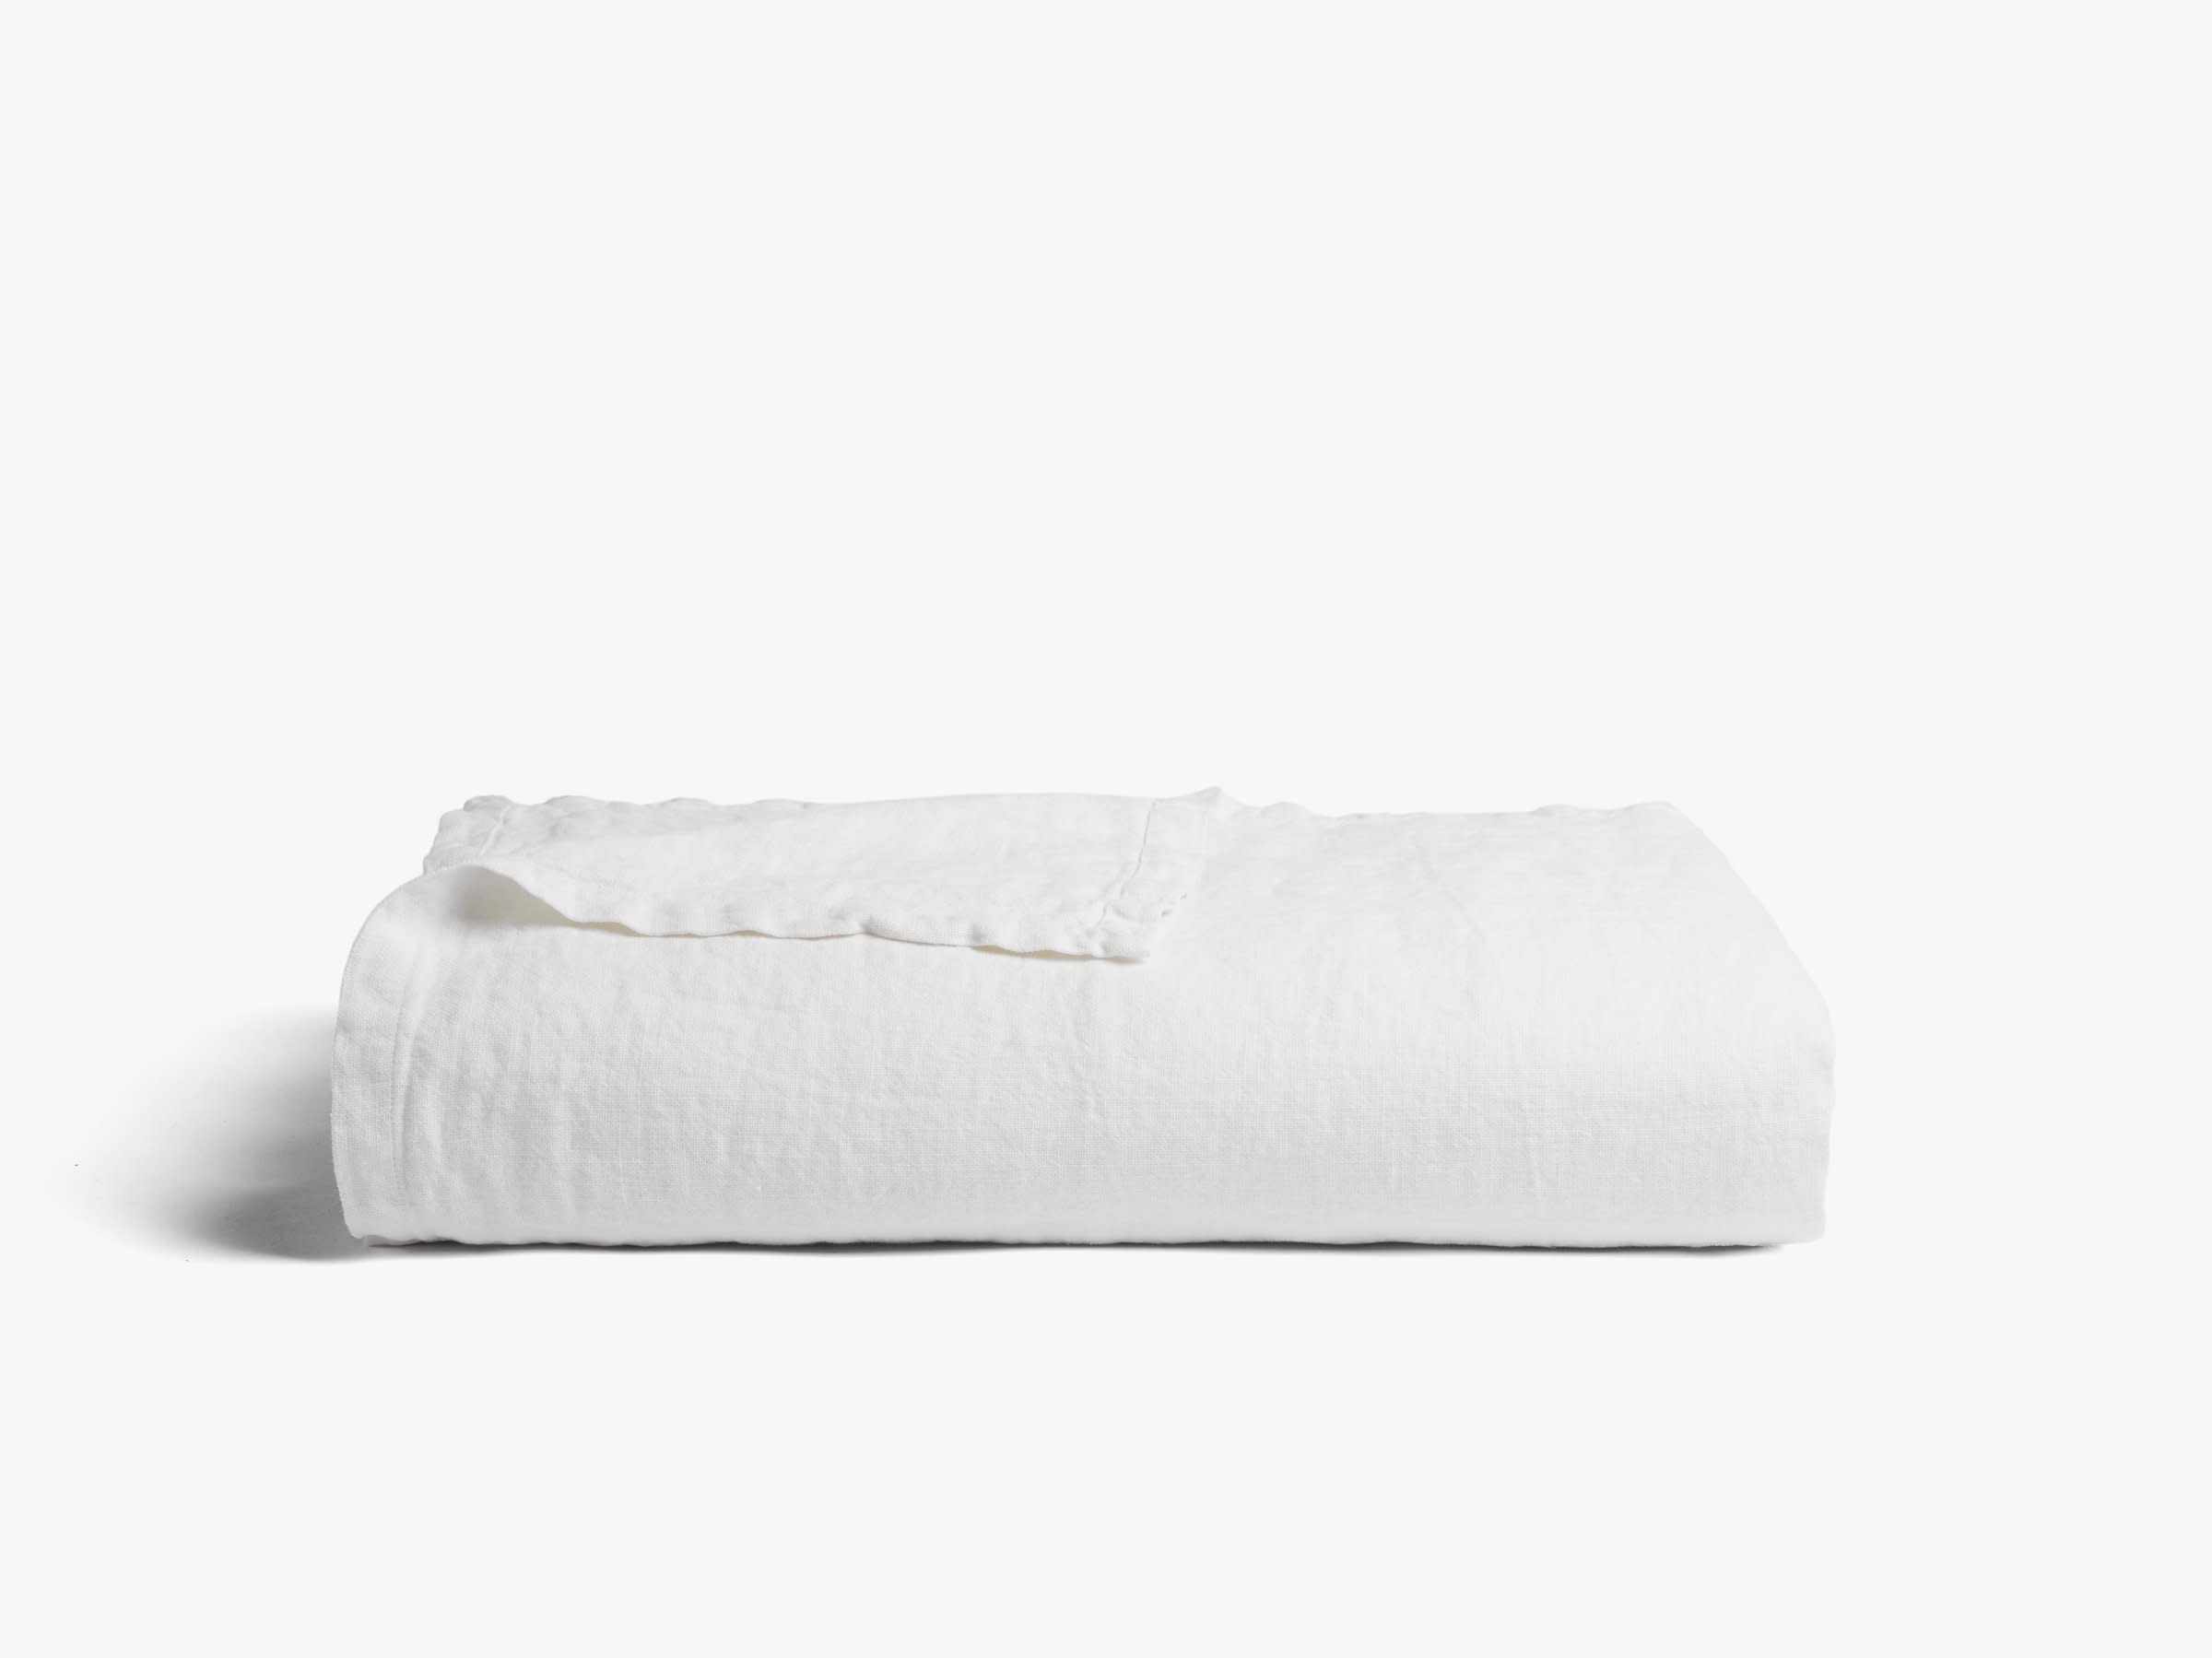 Antique White Vintage Linen Bed Cover Product Image